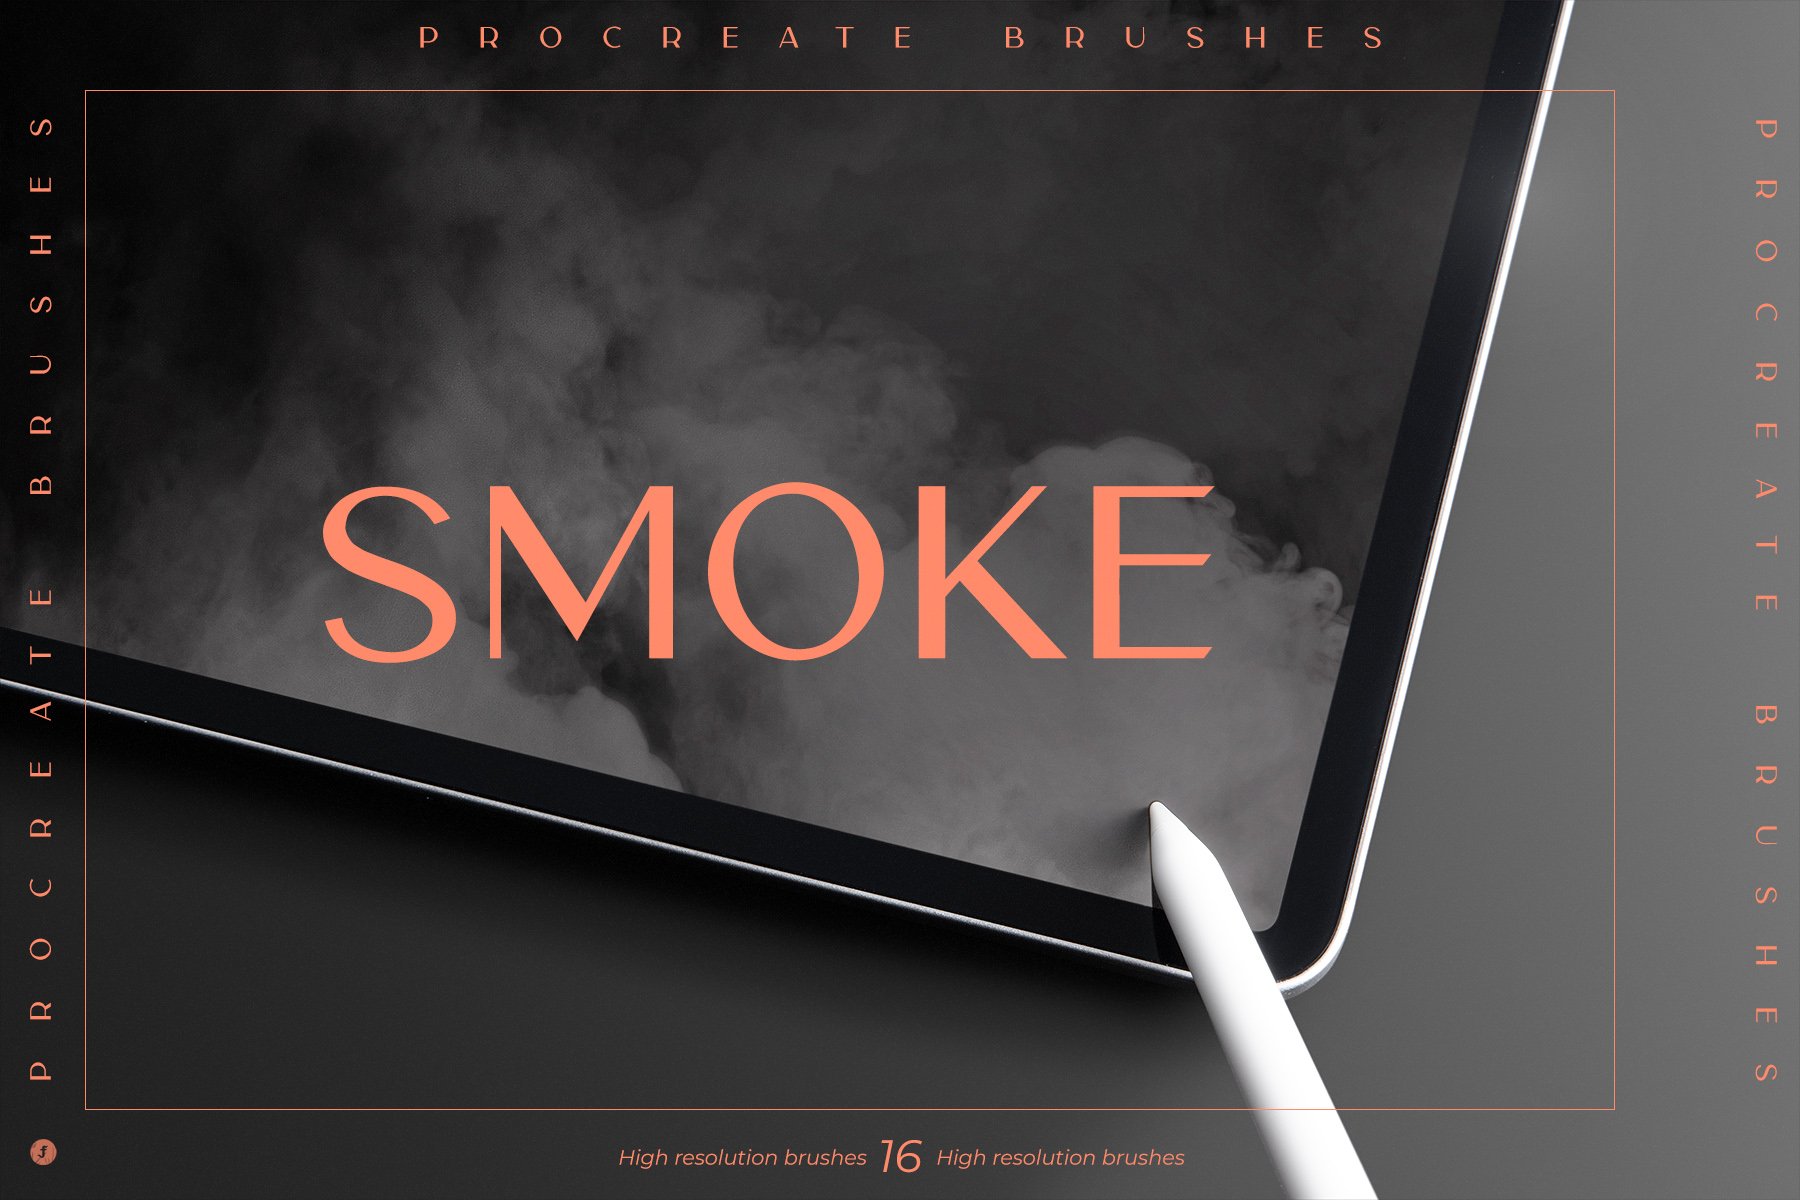 Smoke brushes for improve your illustrations.